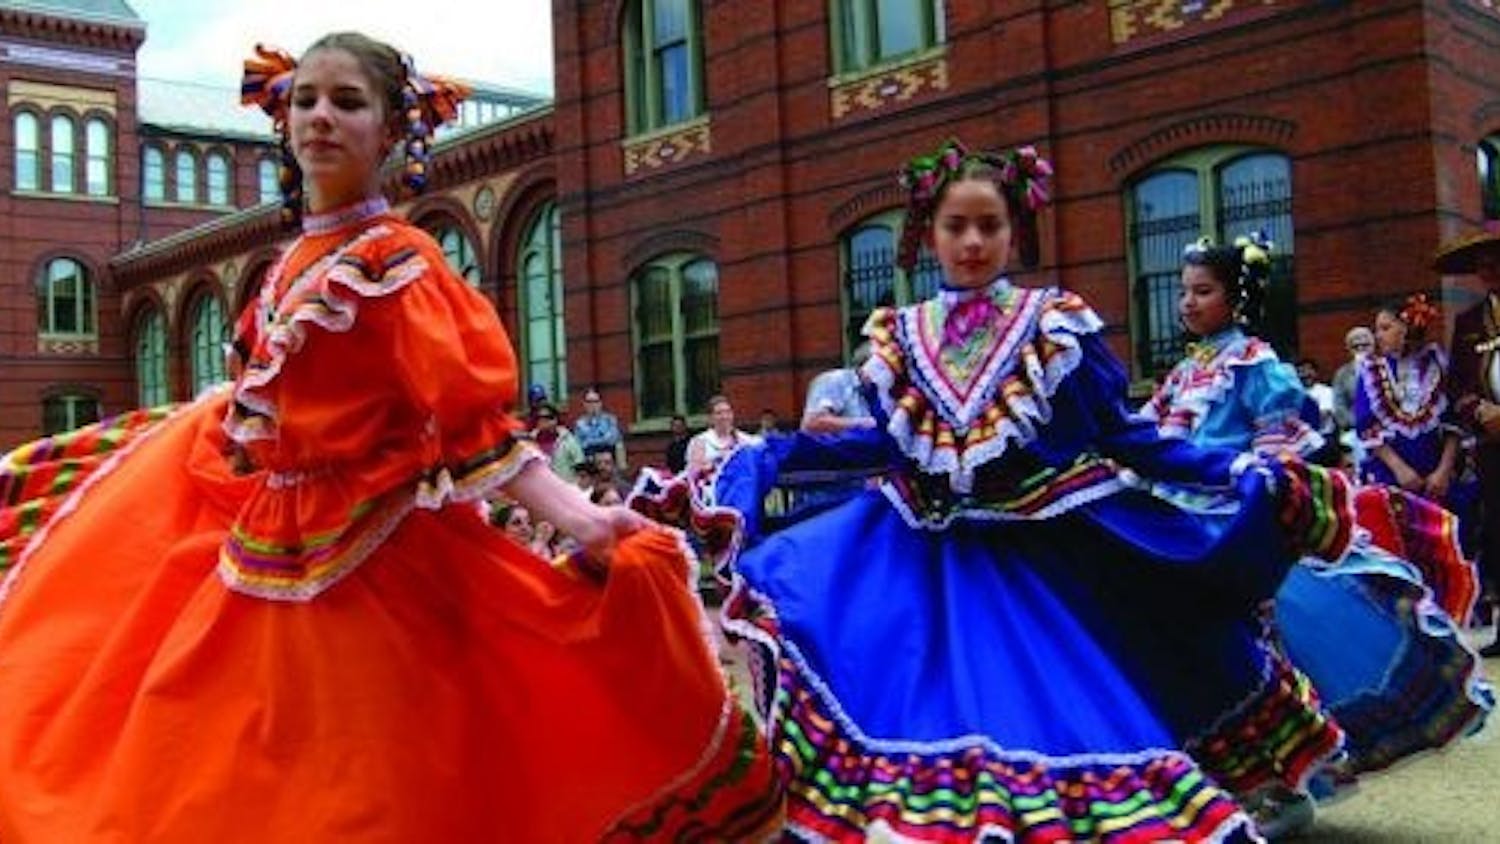 Dancers gather for the&nbsp;Hispanic Heritage Month Family Day, hosted by the Smithsonian National Portrait Gallery each year.